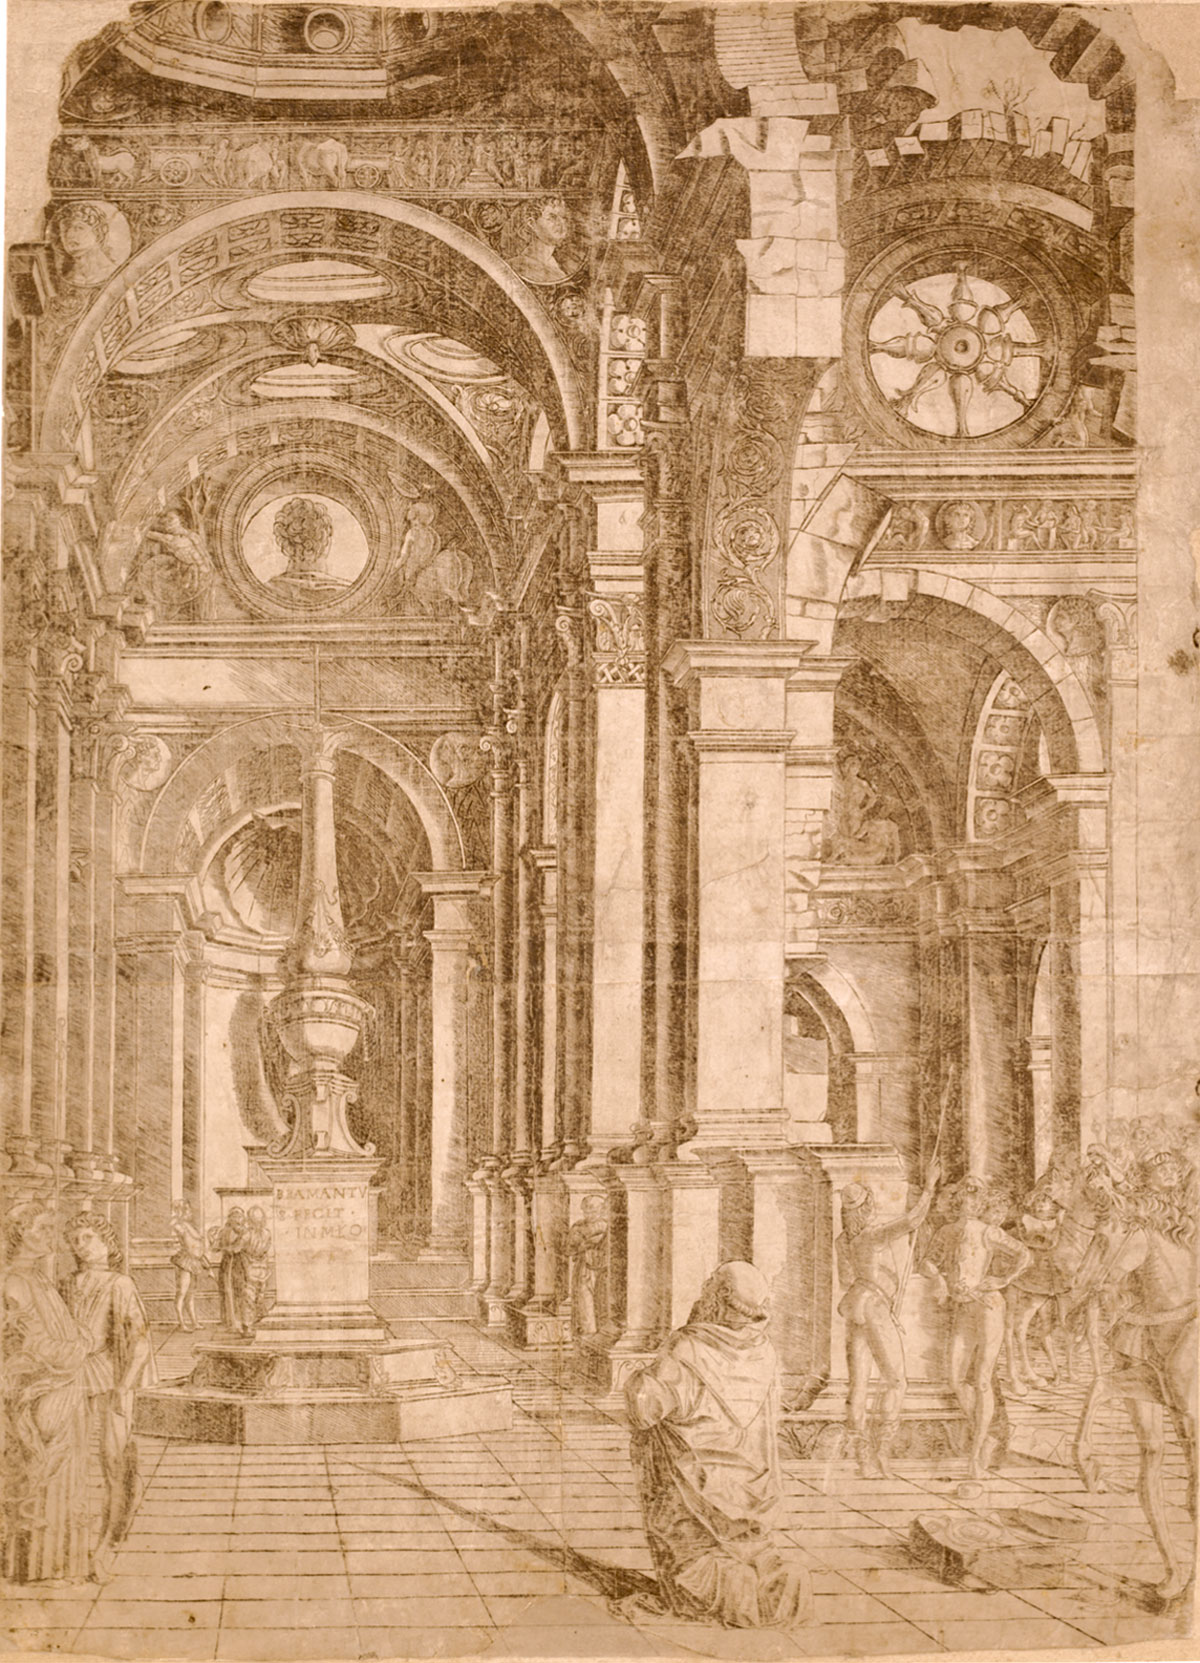 The Cabinets of the Sacristy of Santa Maria delle Grazie in Milan and the Representation of Architecture